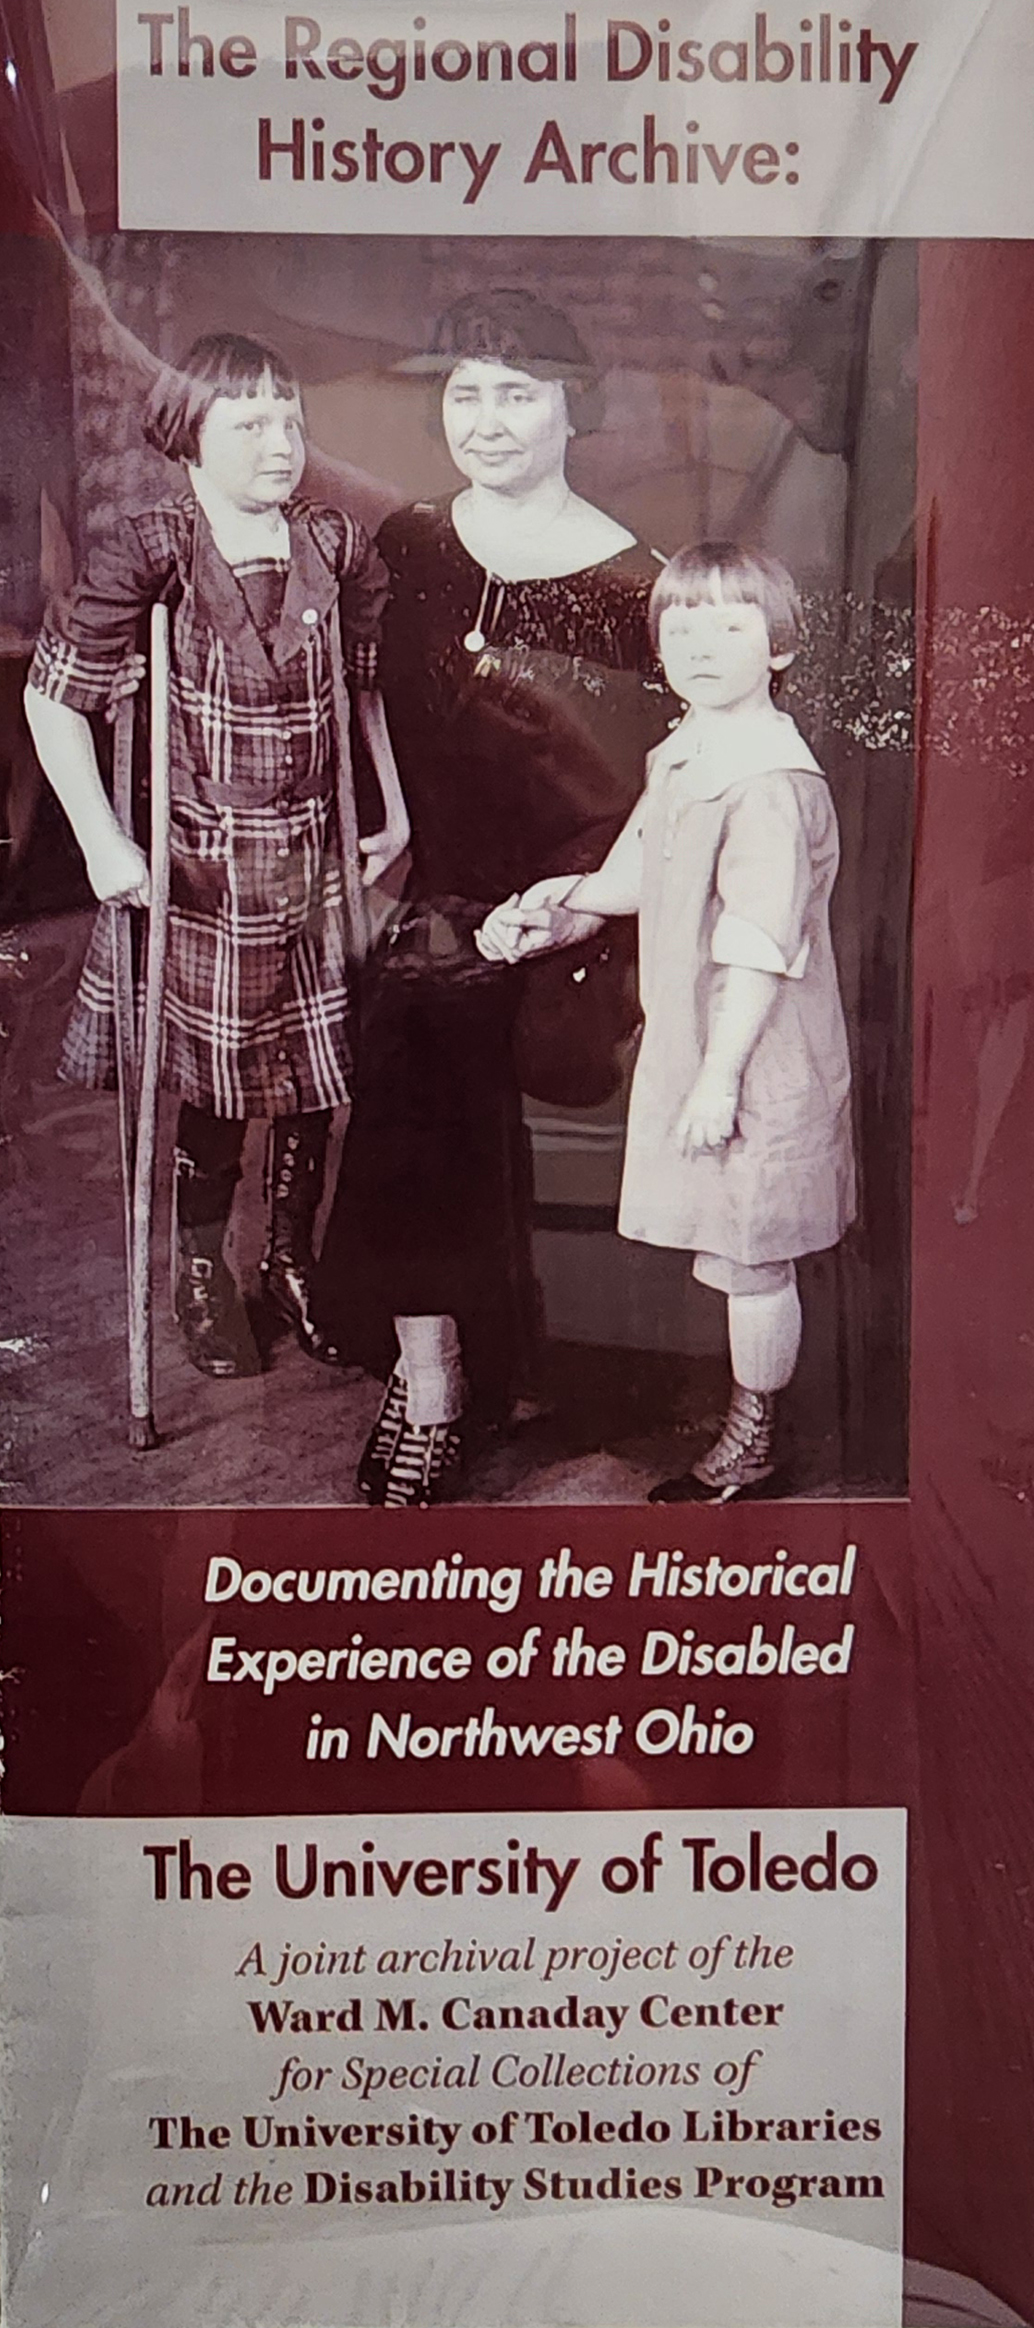 The Regional Disability History Archive: Documenting the Historical Experience of the Disabled in Northwest Ohio